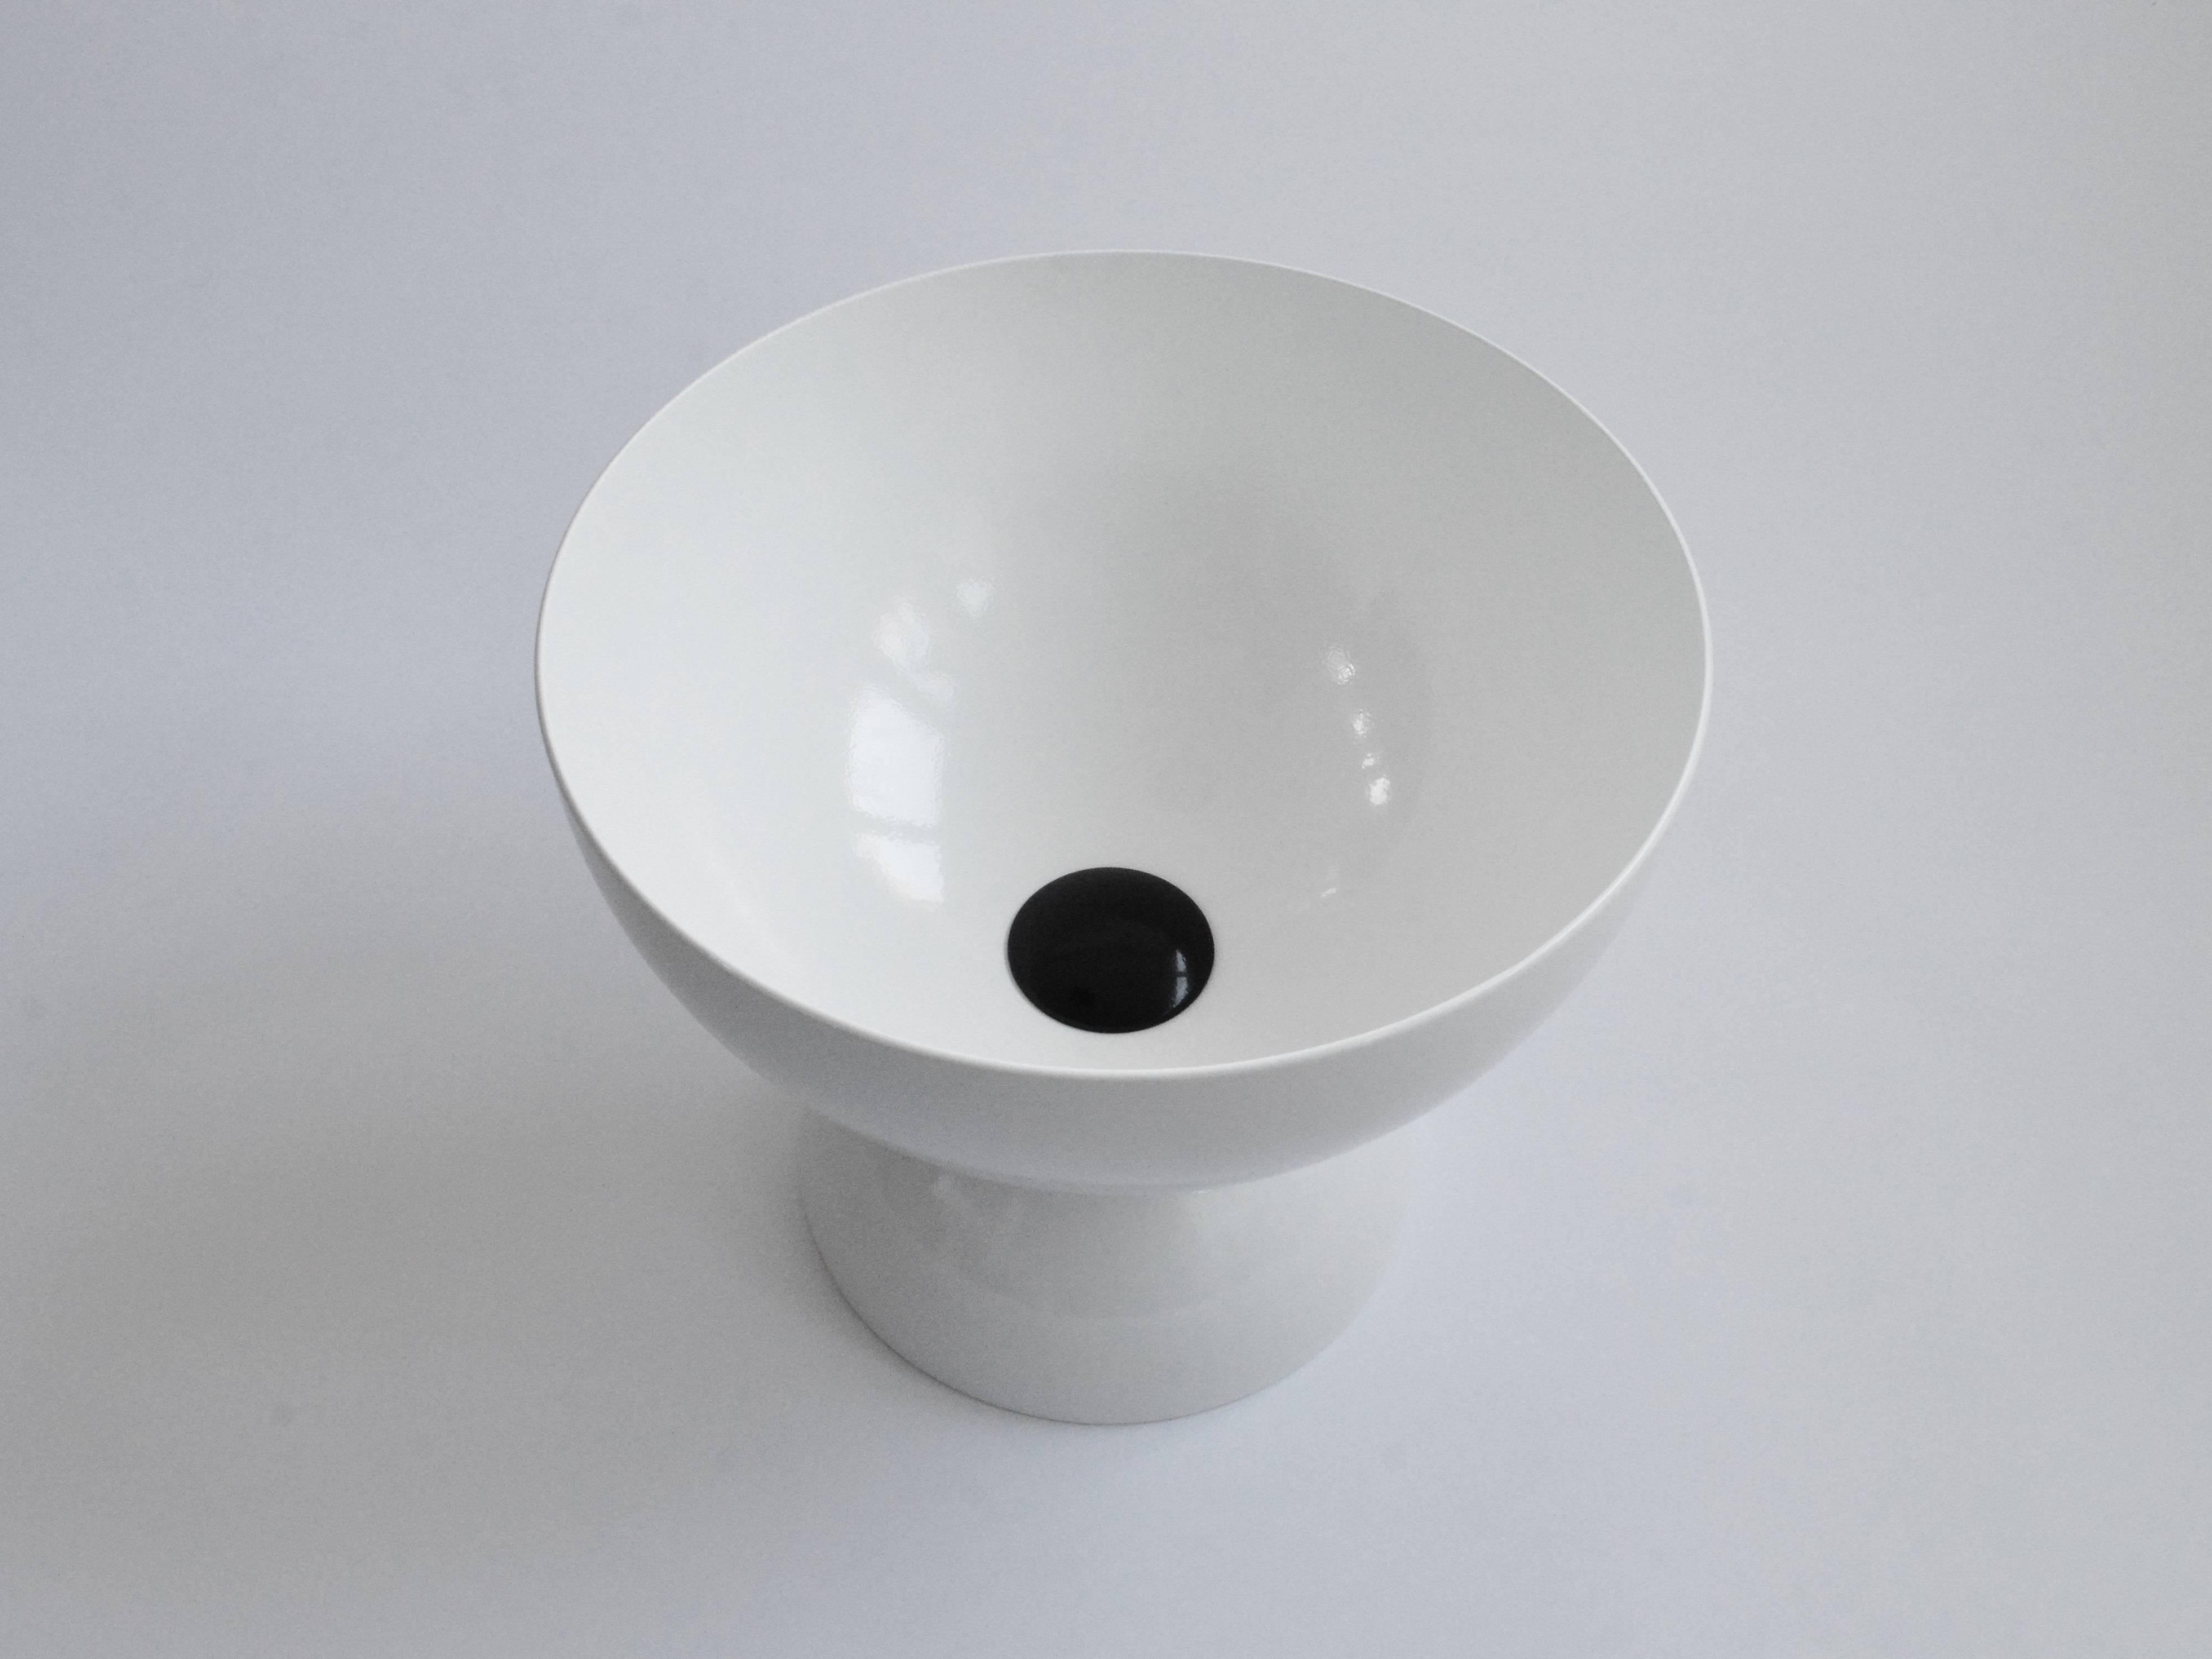 Contemporary bowl designed and made by independent product and furniture designer Connor Holland.

The Titan Bowl is part of the Saturn Six range, a series of designs inspired by space exploration and the Saturn V rocket. The largest of the three